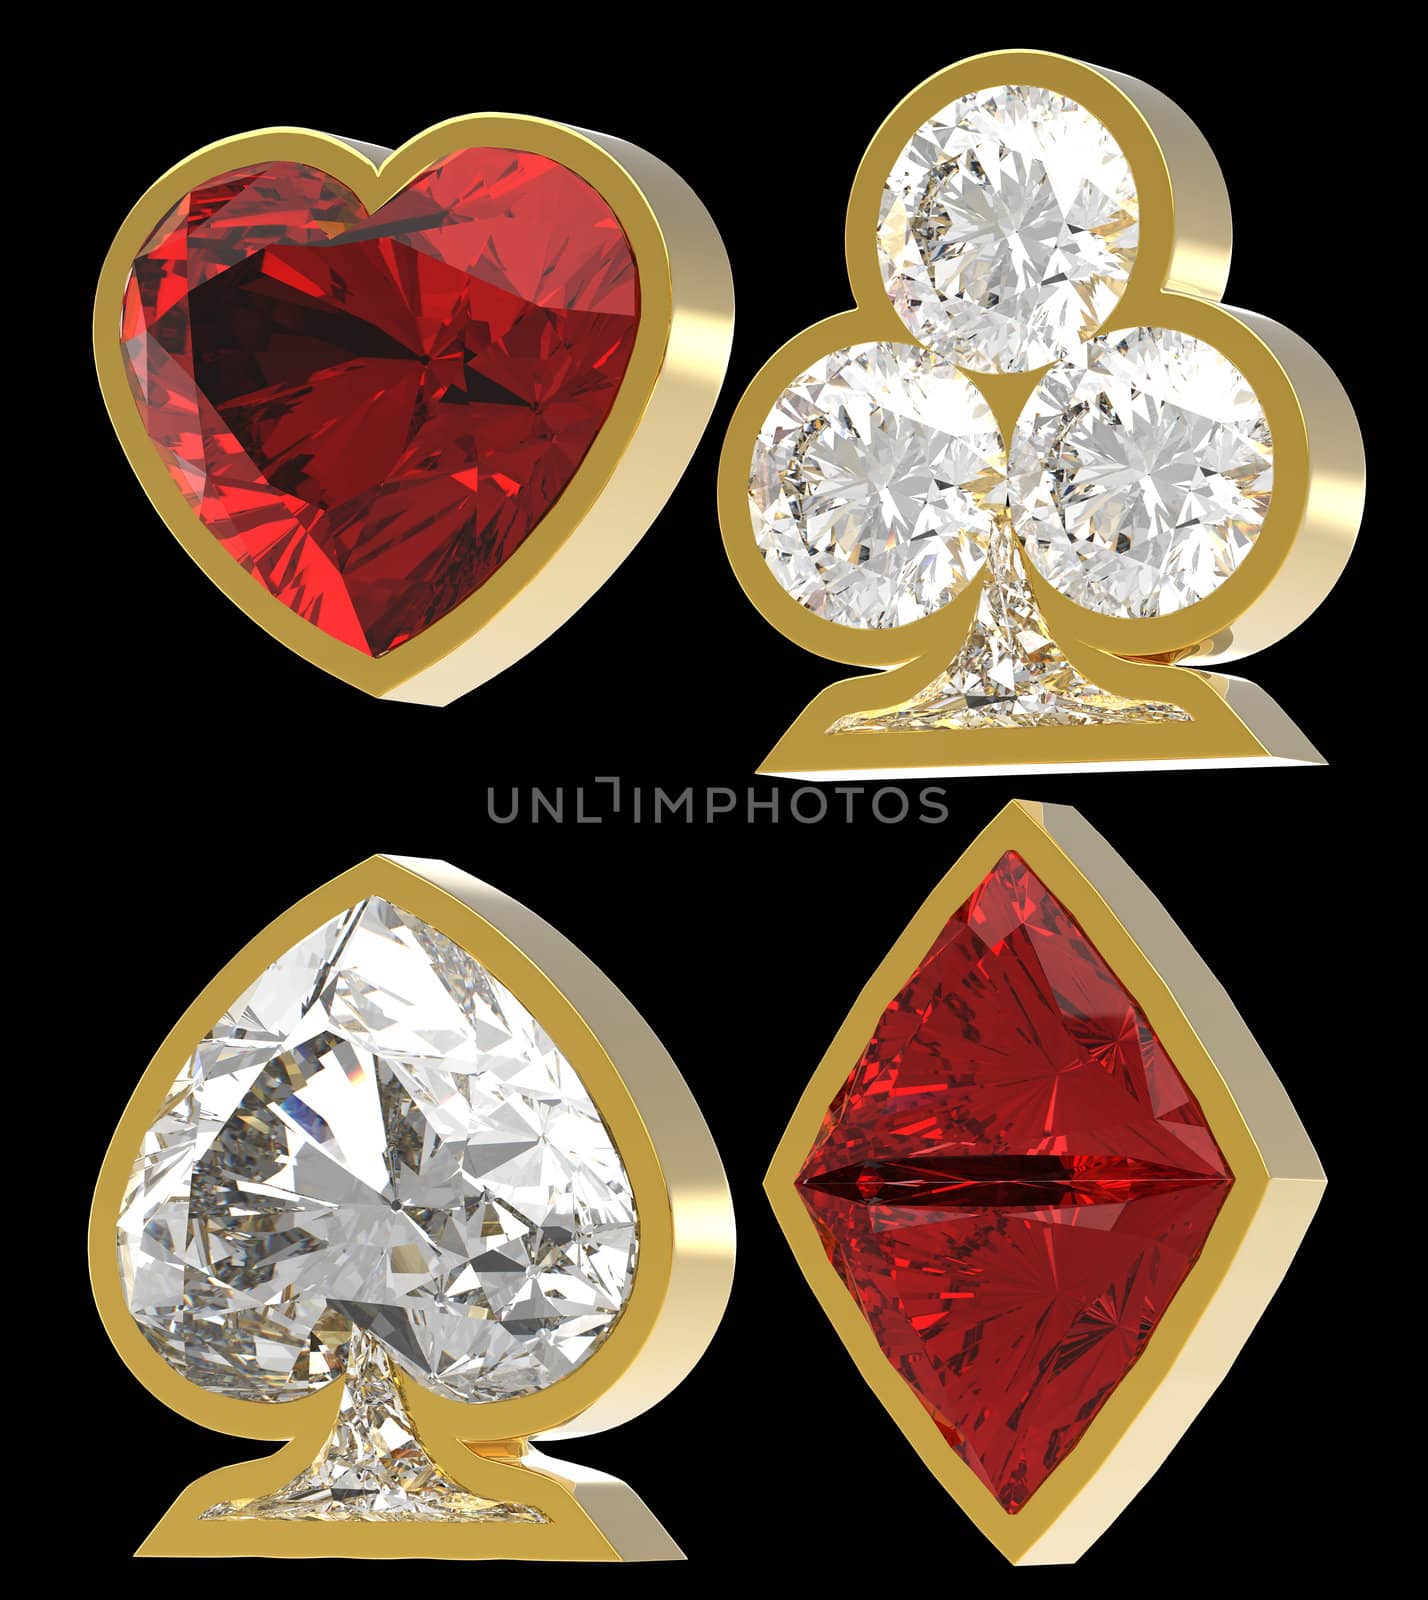 Diamond shaped Card Suits with golden framing by Arsgera